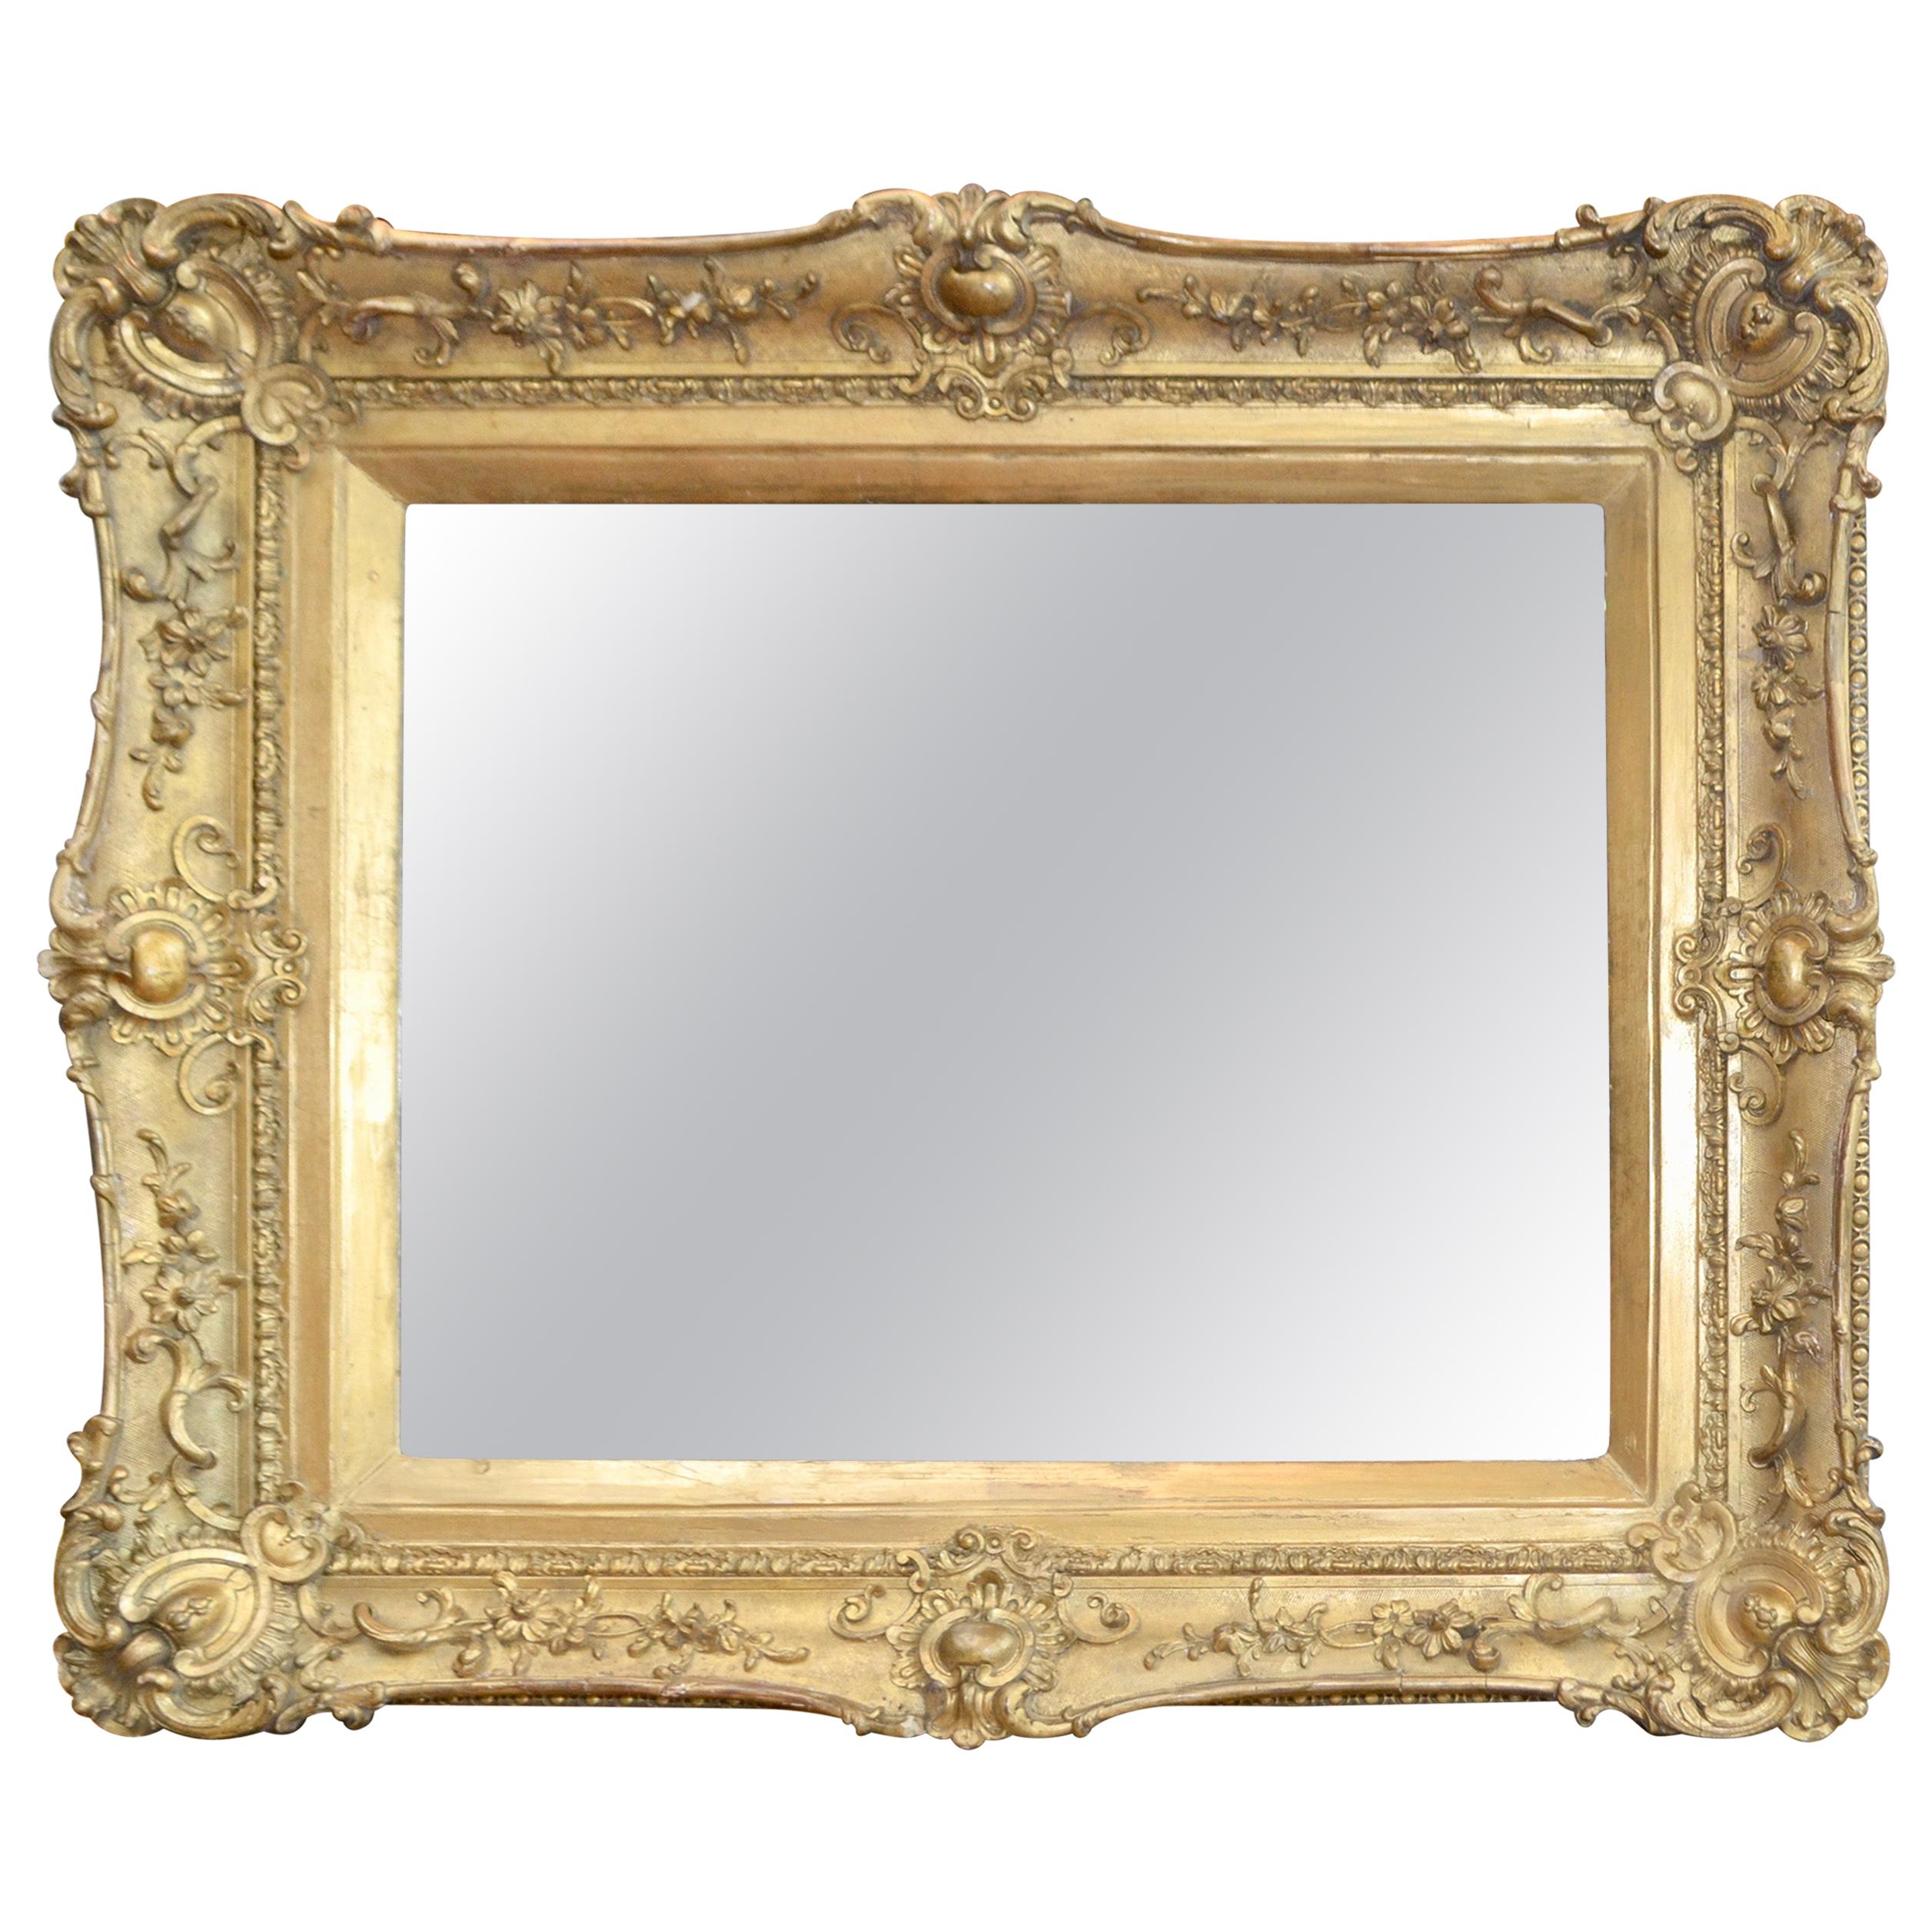 Carved Wood and Gesso Gilded Framed Mirror